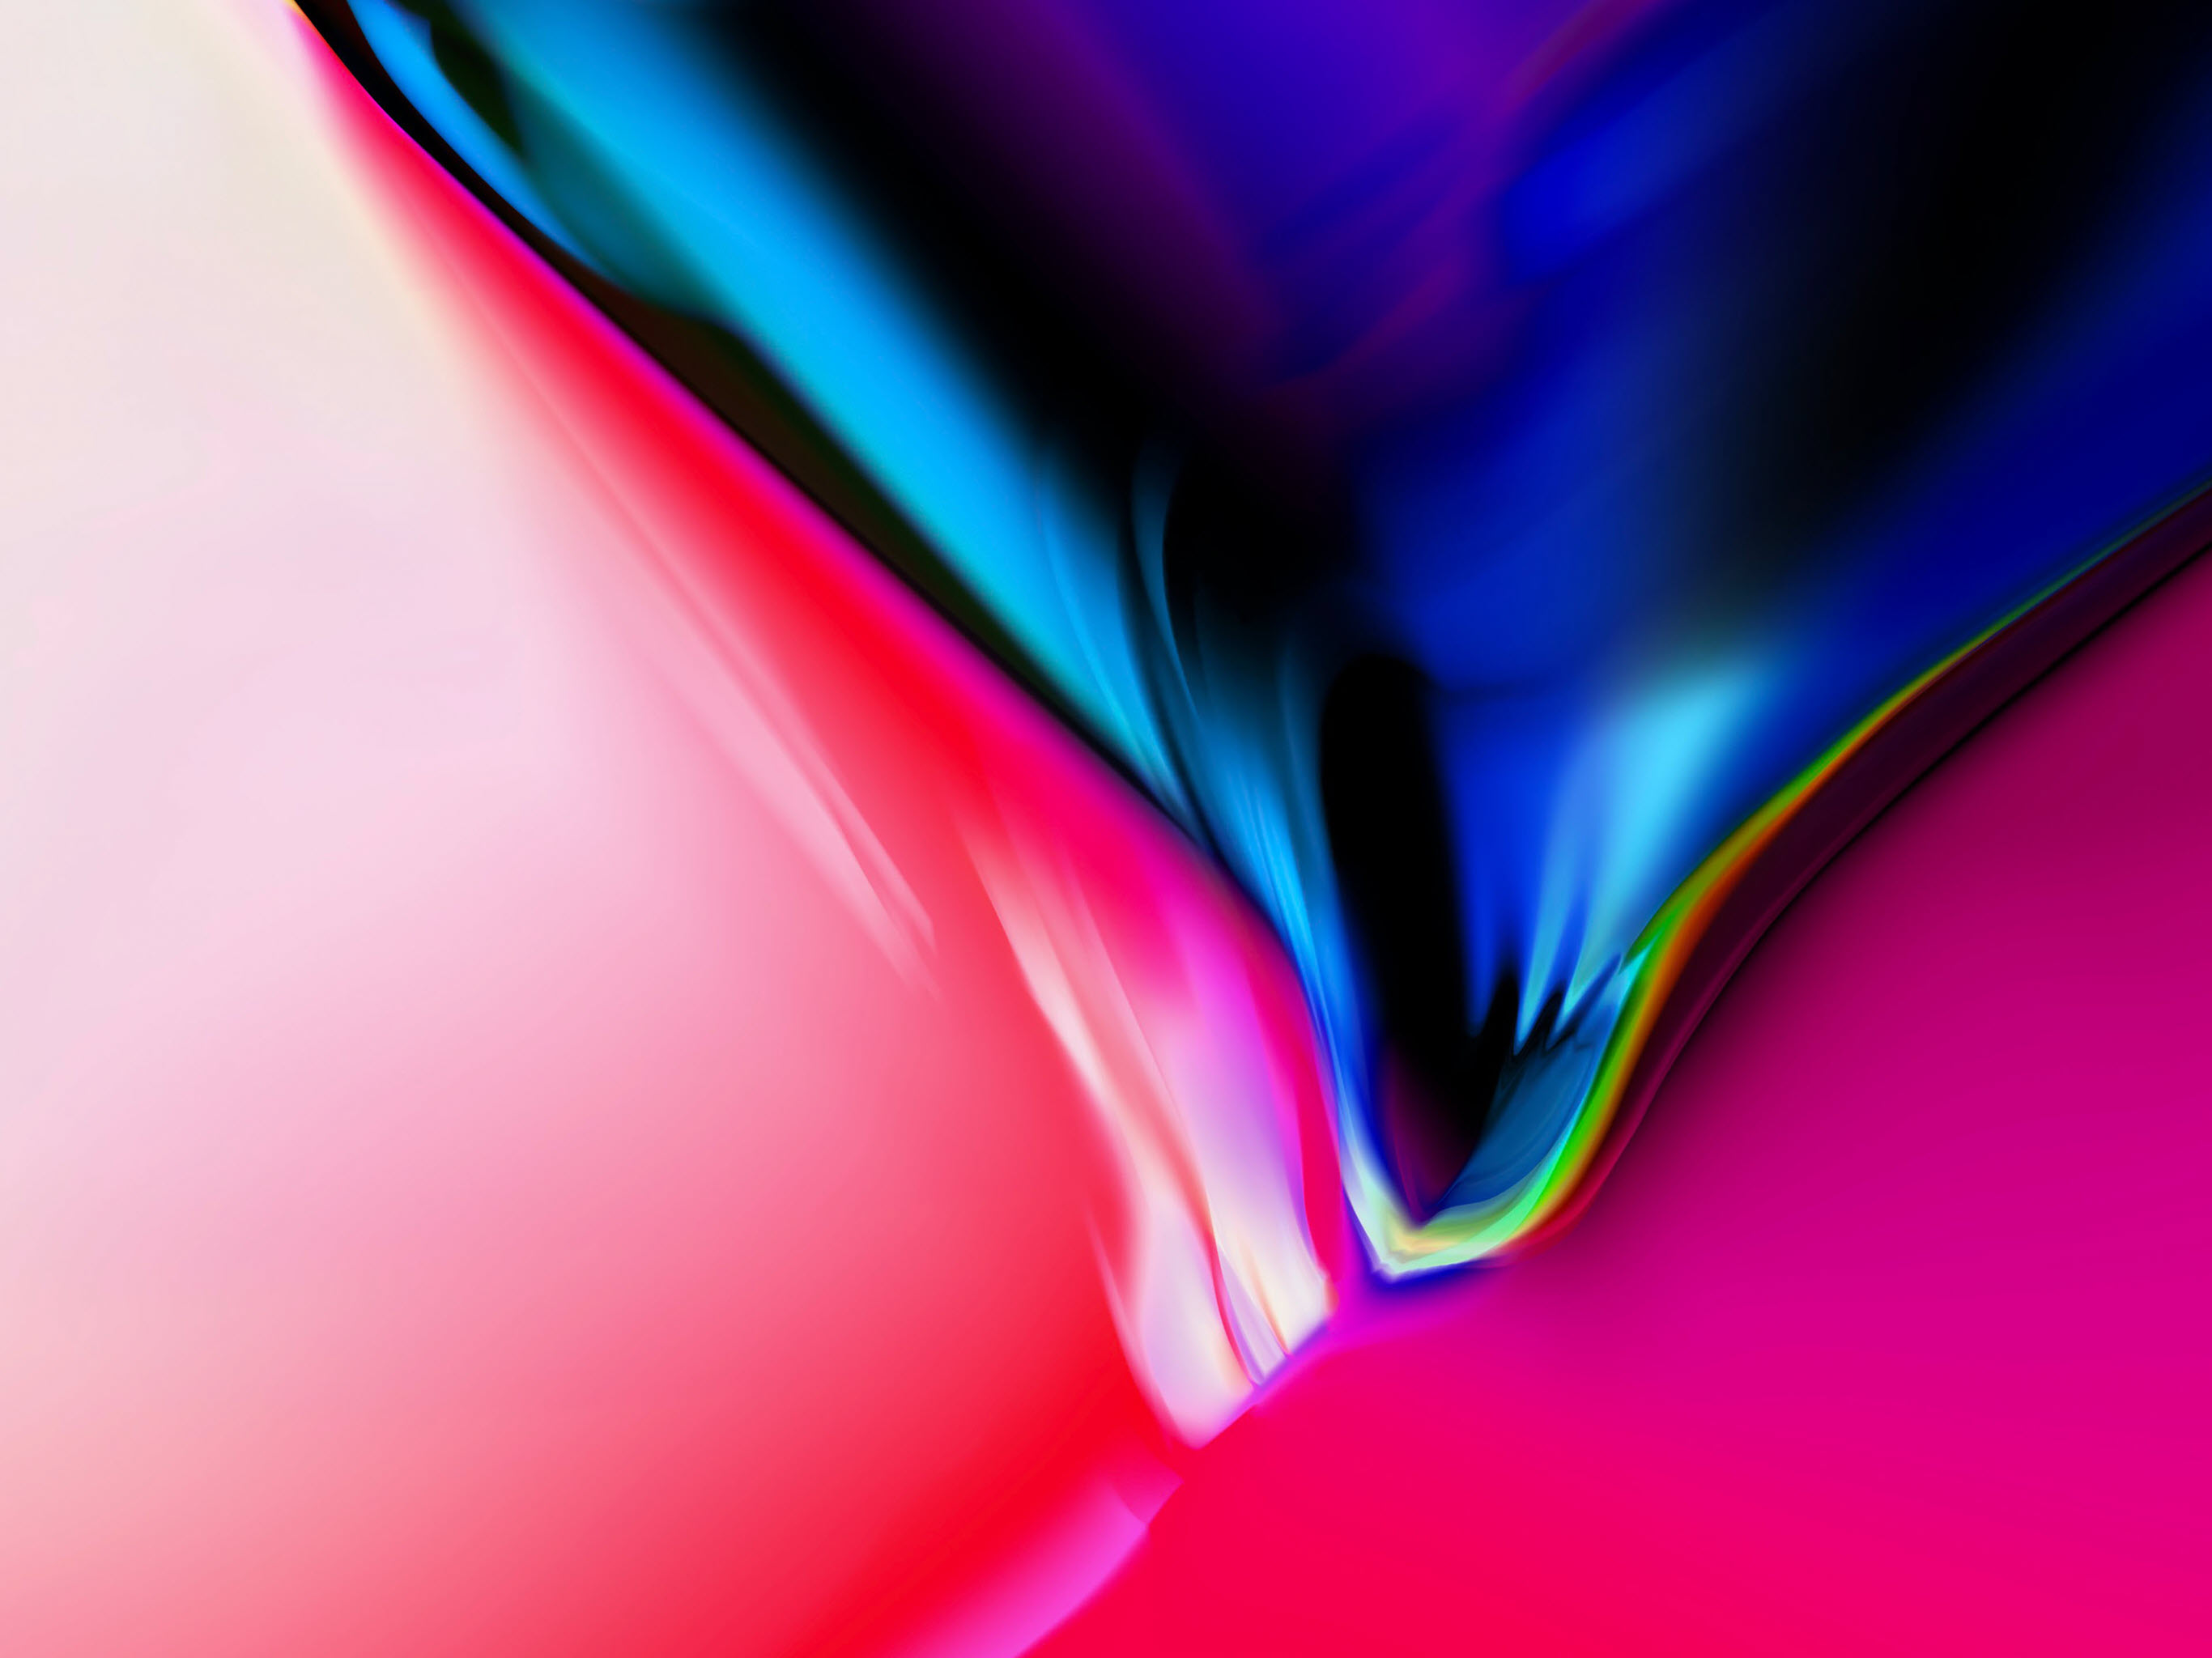 Download the M2 iPad Pro and iPad 10 wallpapers right here